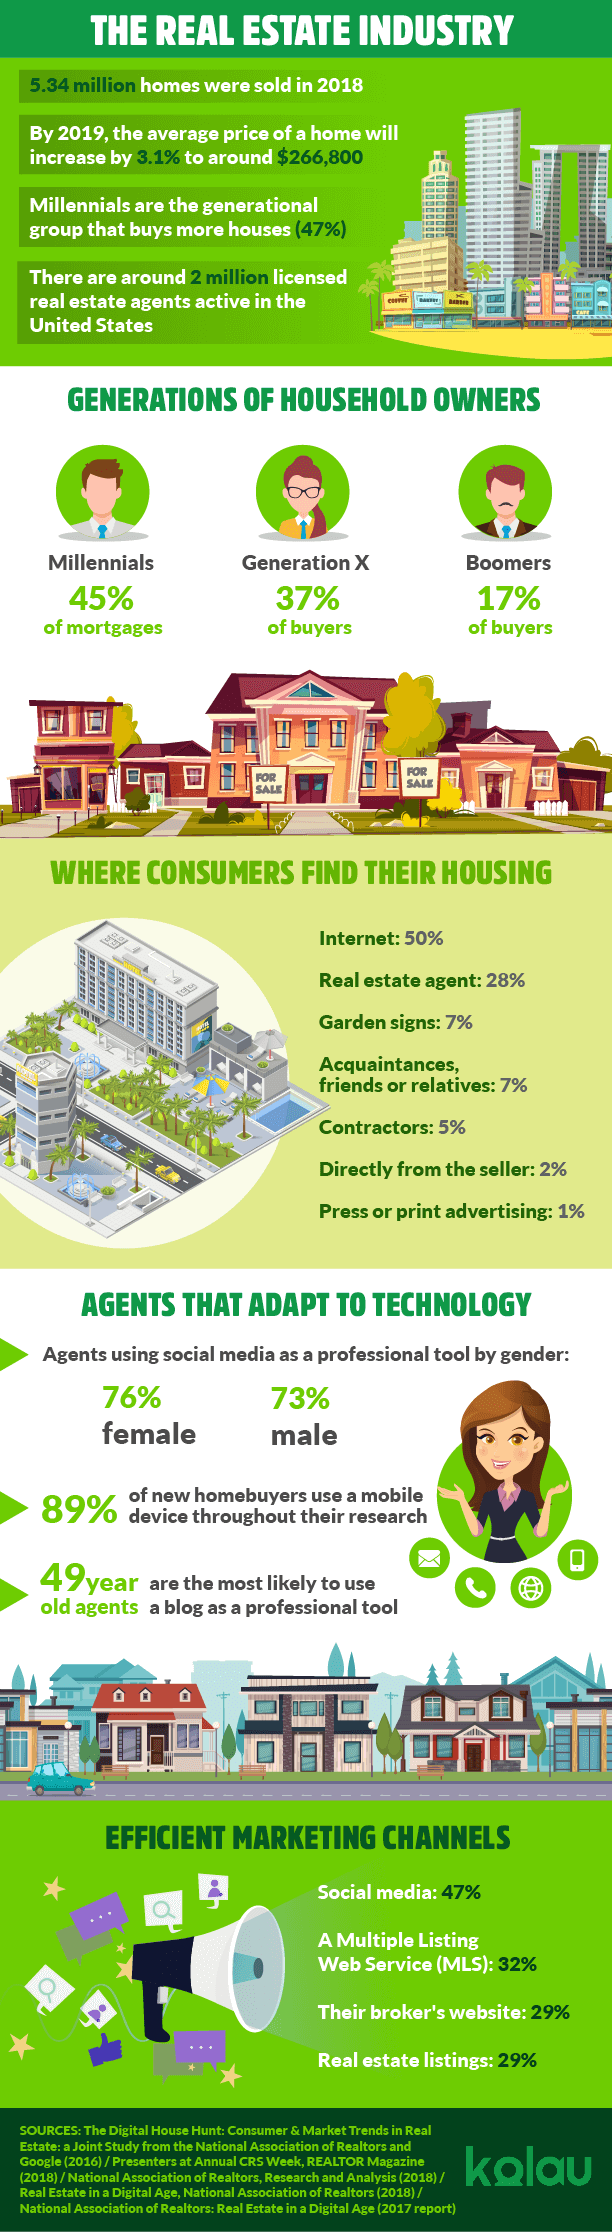 Infographic about how to get clients in real estate.